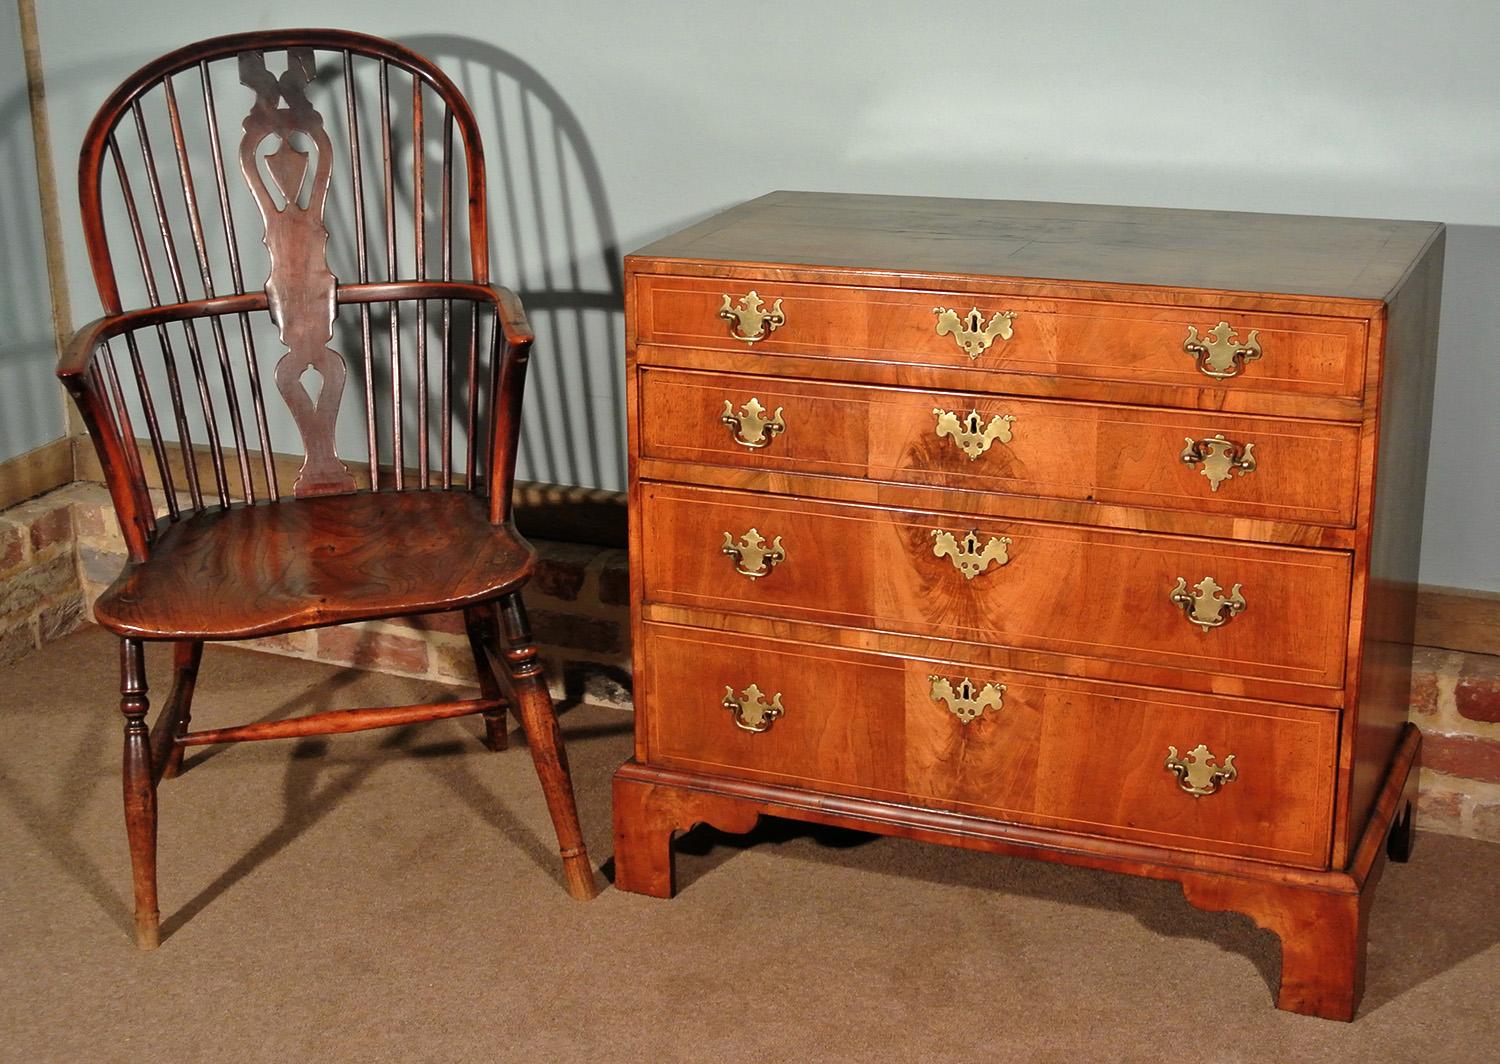 A good quality 19th century walnut chest of drawers of well balanced proportions. The caddy top over four graduated long drawers, each strung with satinwood and with solid brass batswing handles and matching escutcheons.

Well figured walnut